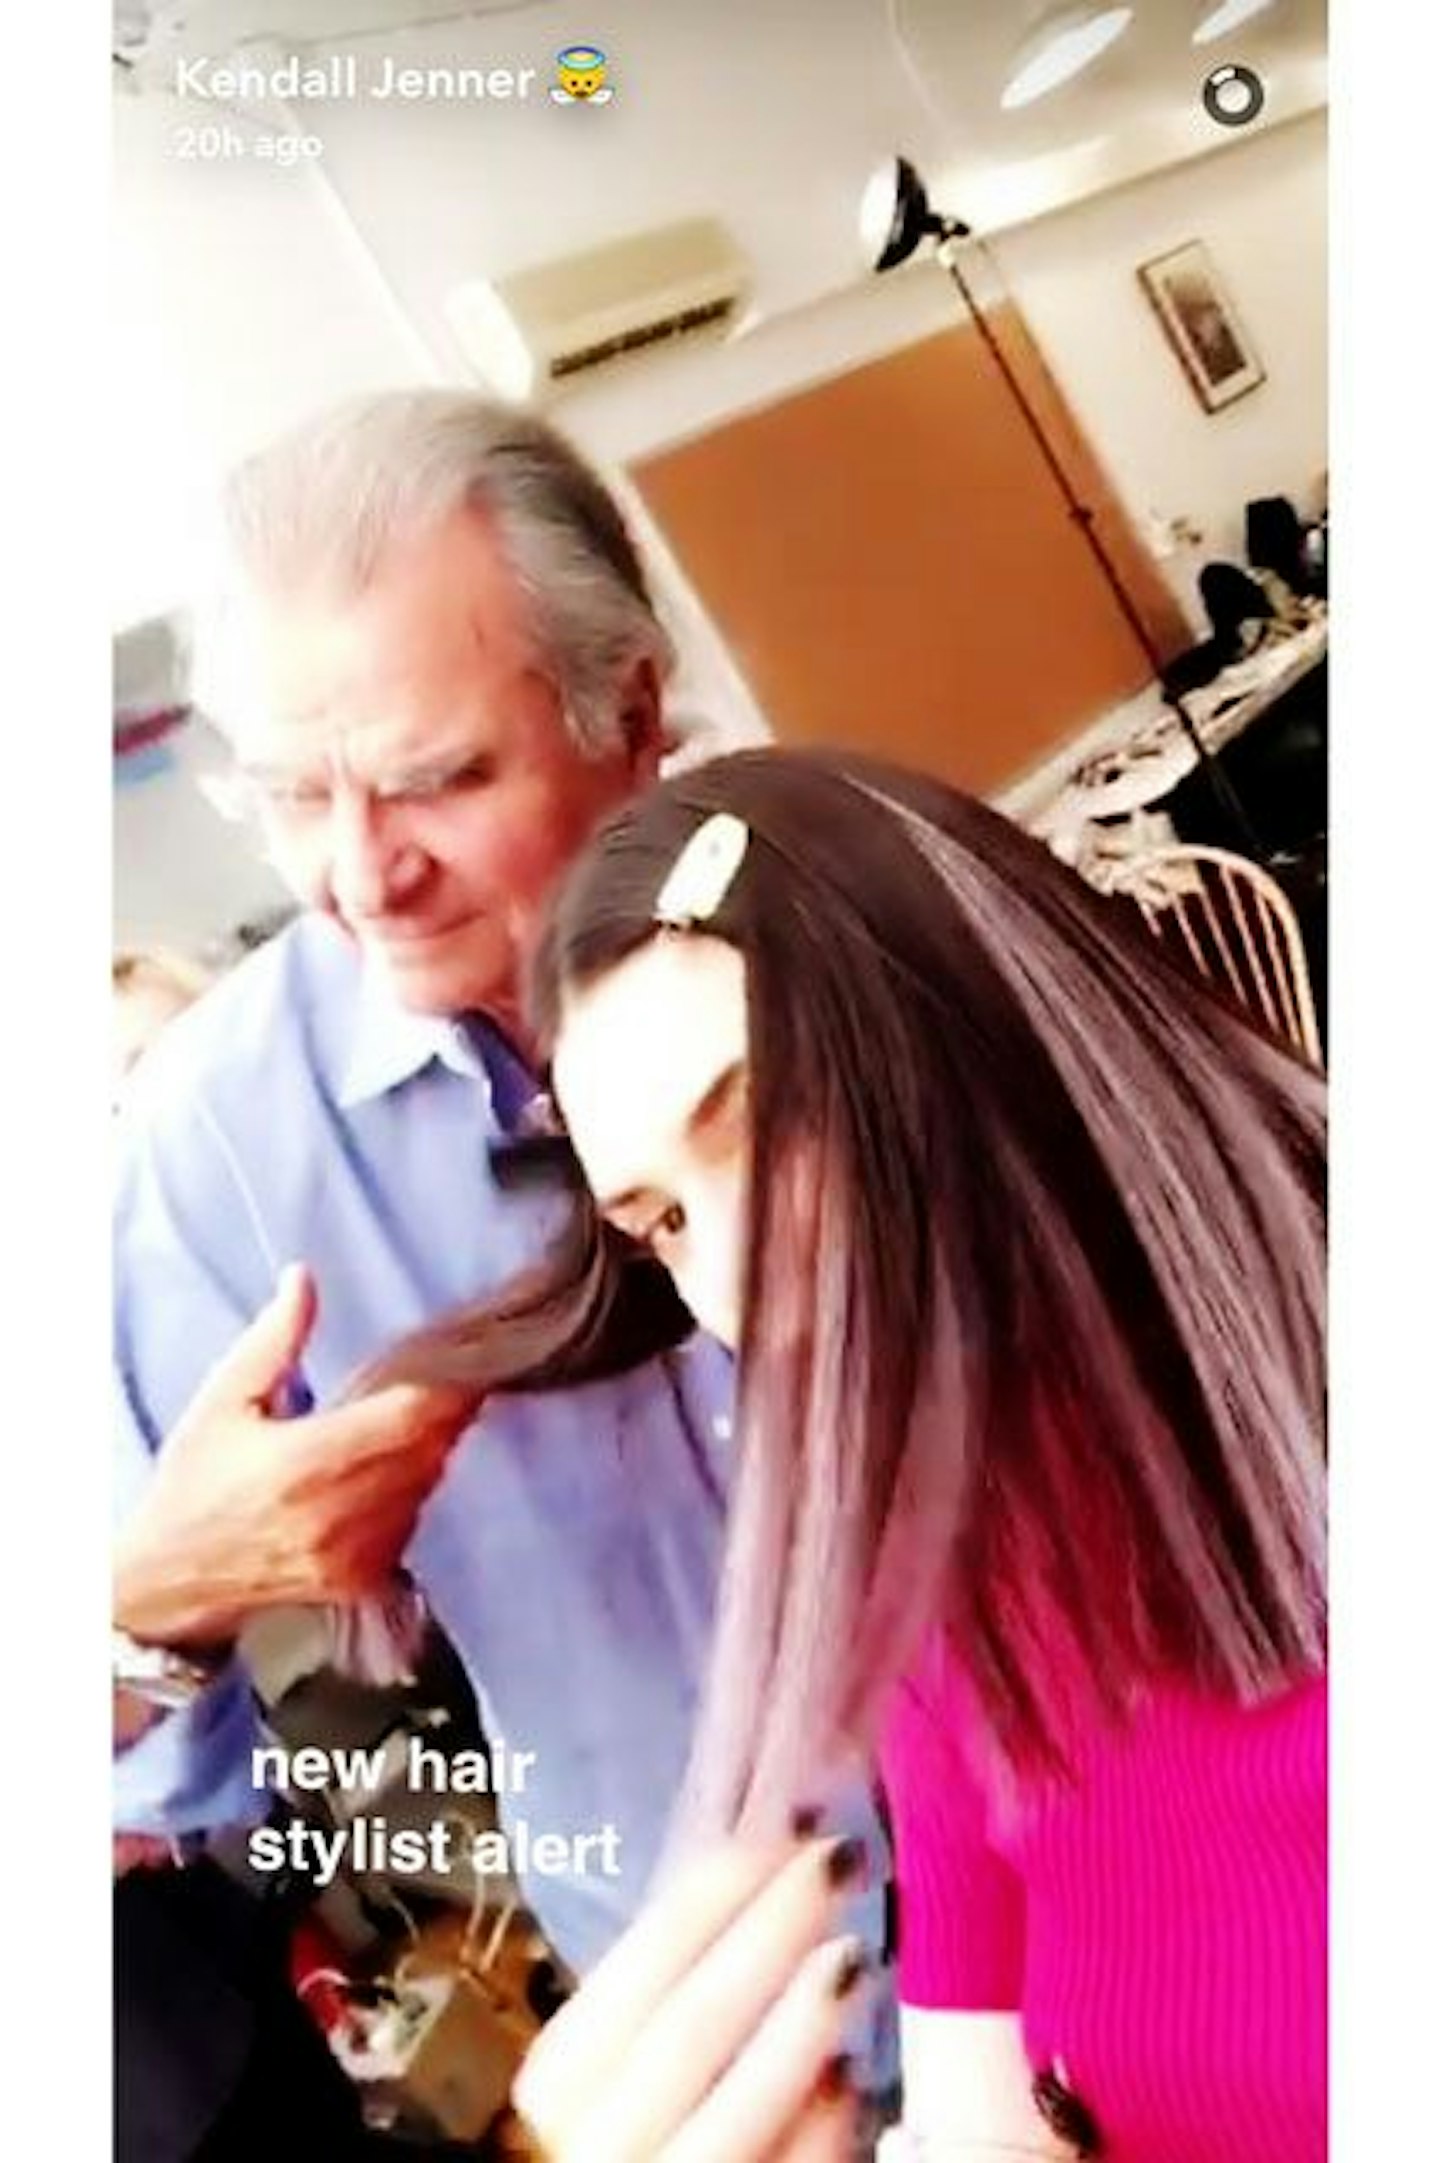 Kendall Jenner and Patrick Demarchelier purple hair